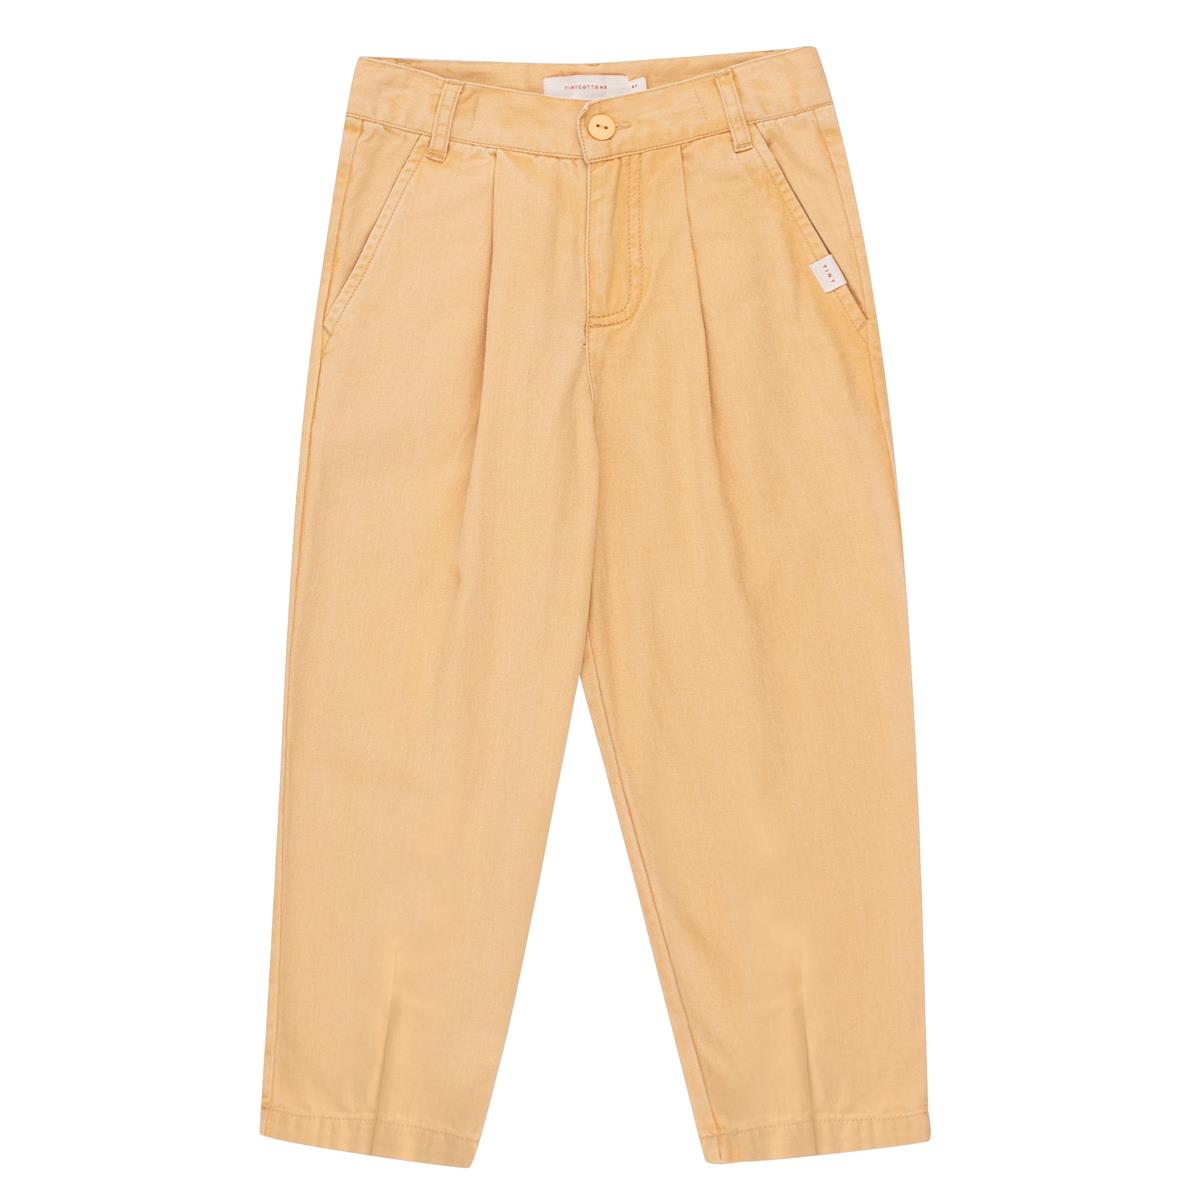 Tinycotttons - PLEATED PANT almond